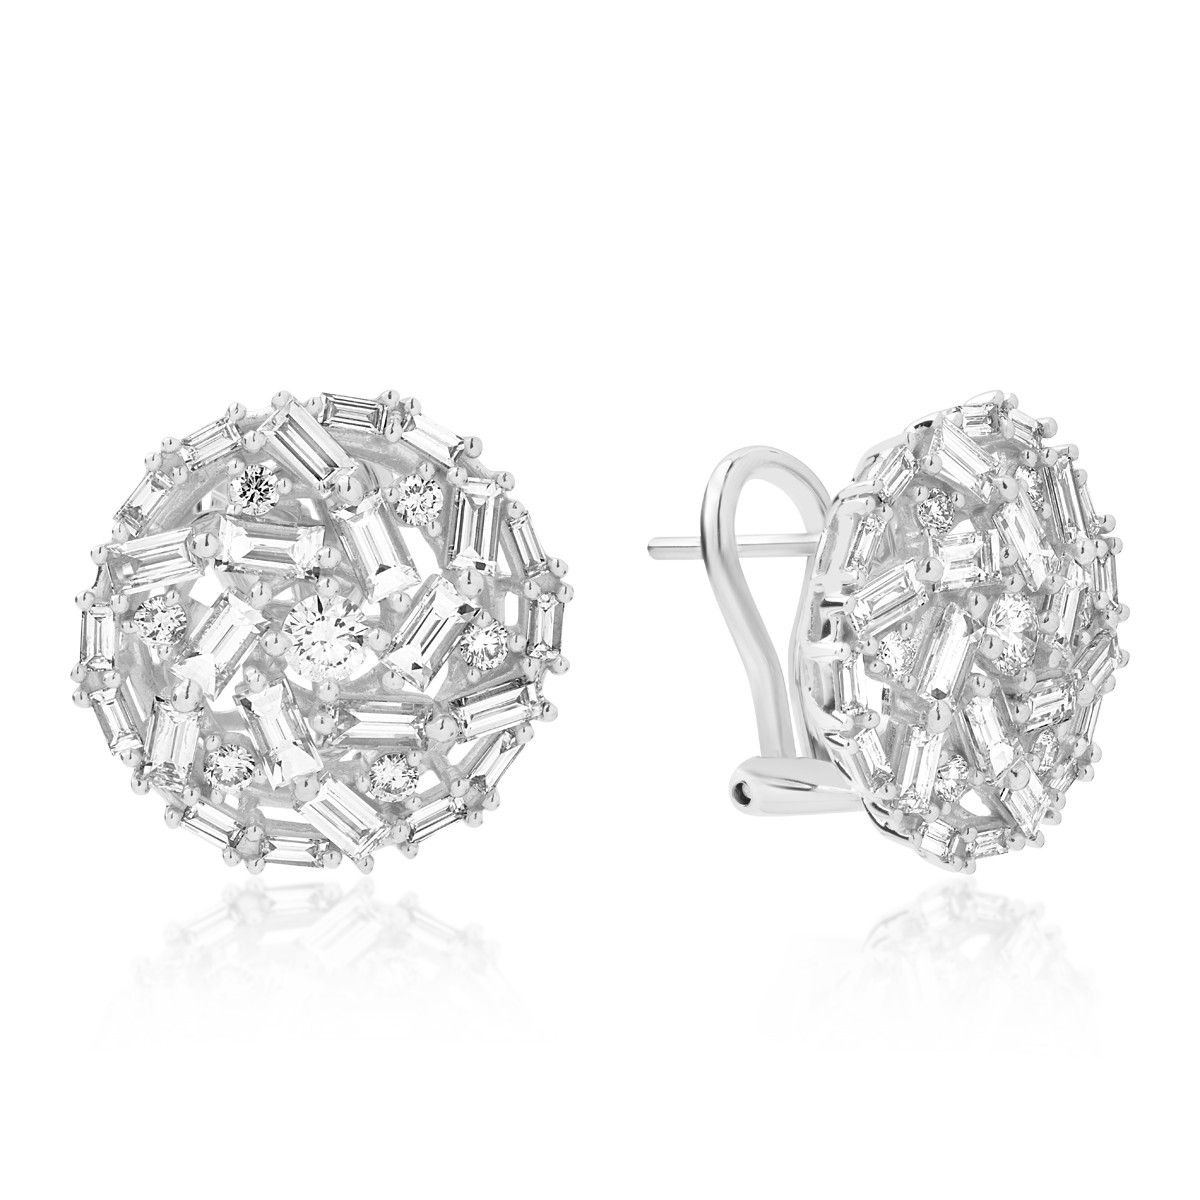 18K white gold earrings with 2.21ct diamonds